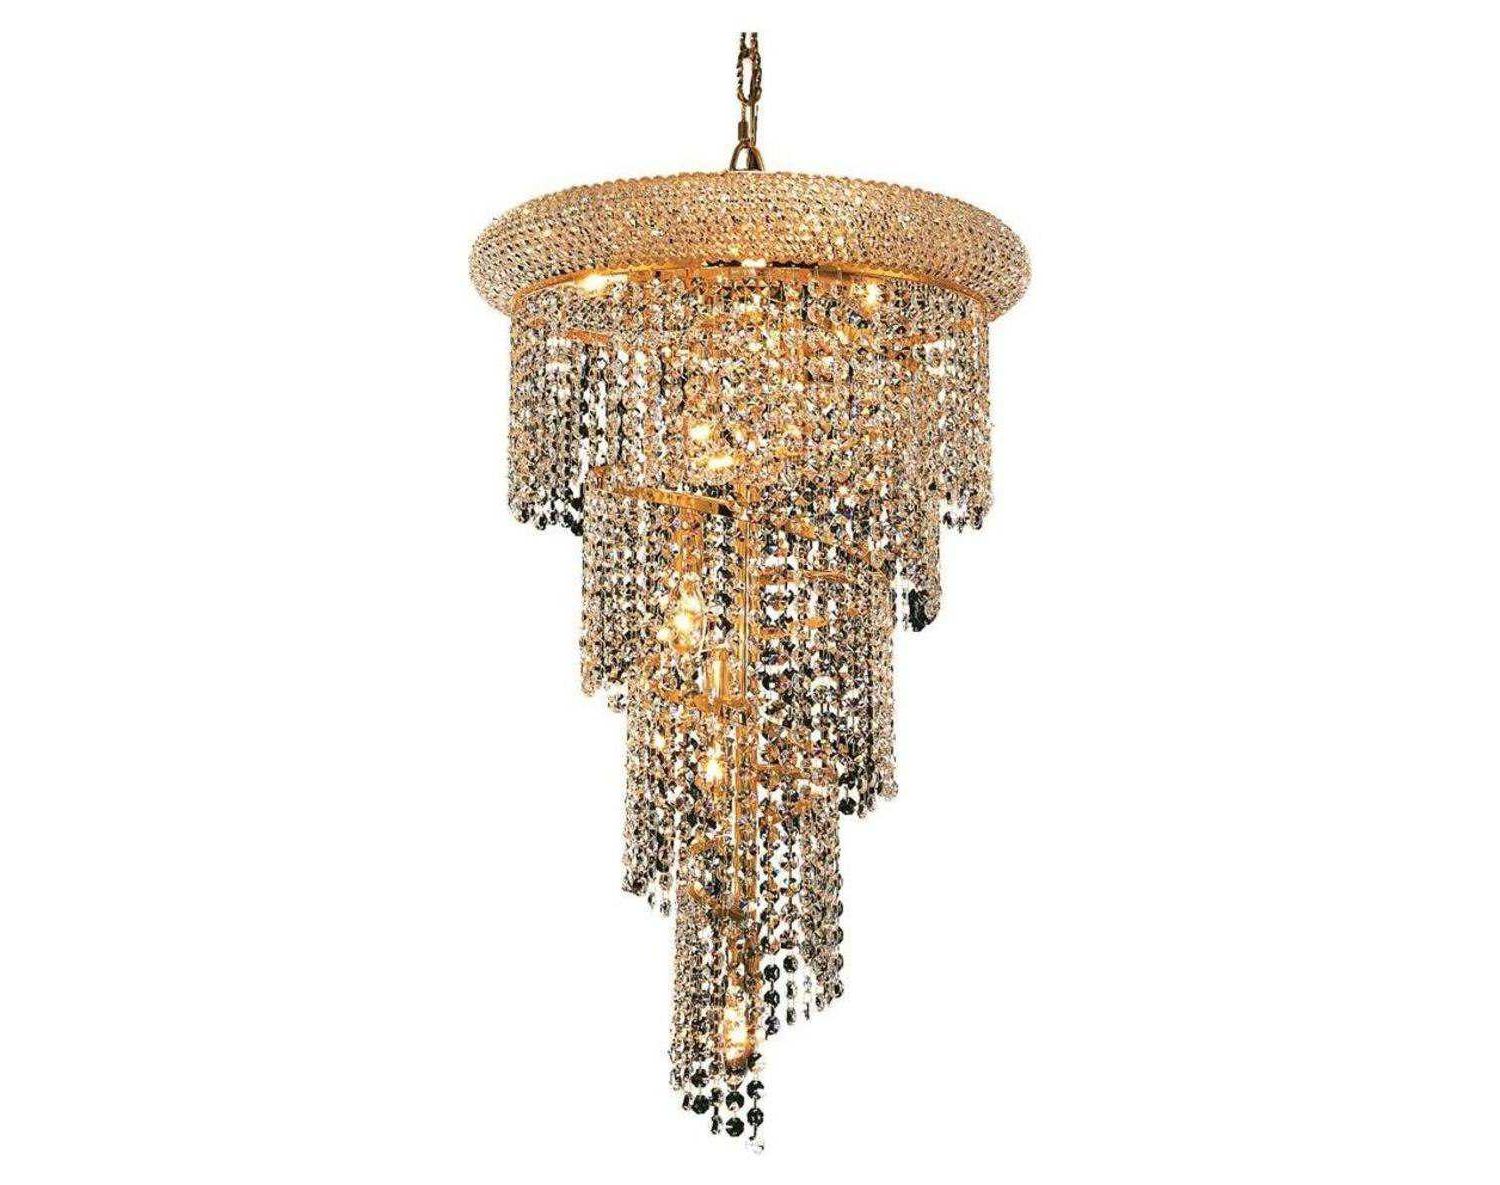 Best And Newest Elegant Lighting Spiral Royal Cut Gold & Crystal Eight Pertaining To Royal Cut Crystal Chandeliers (View 5 of 20)